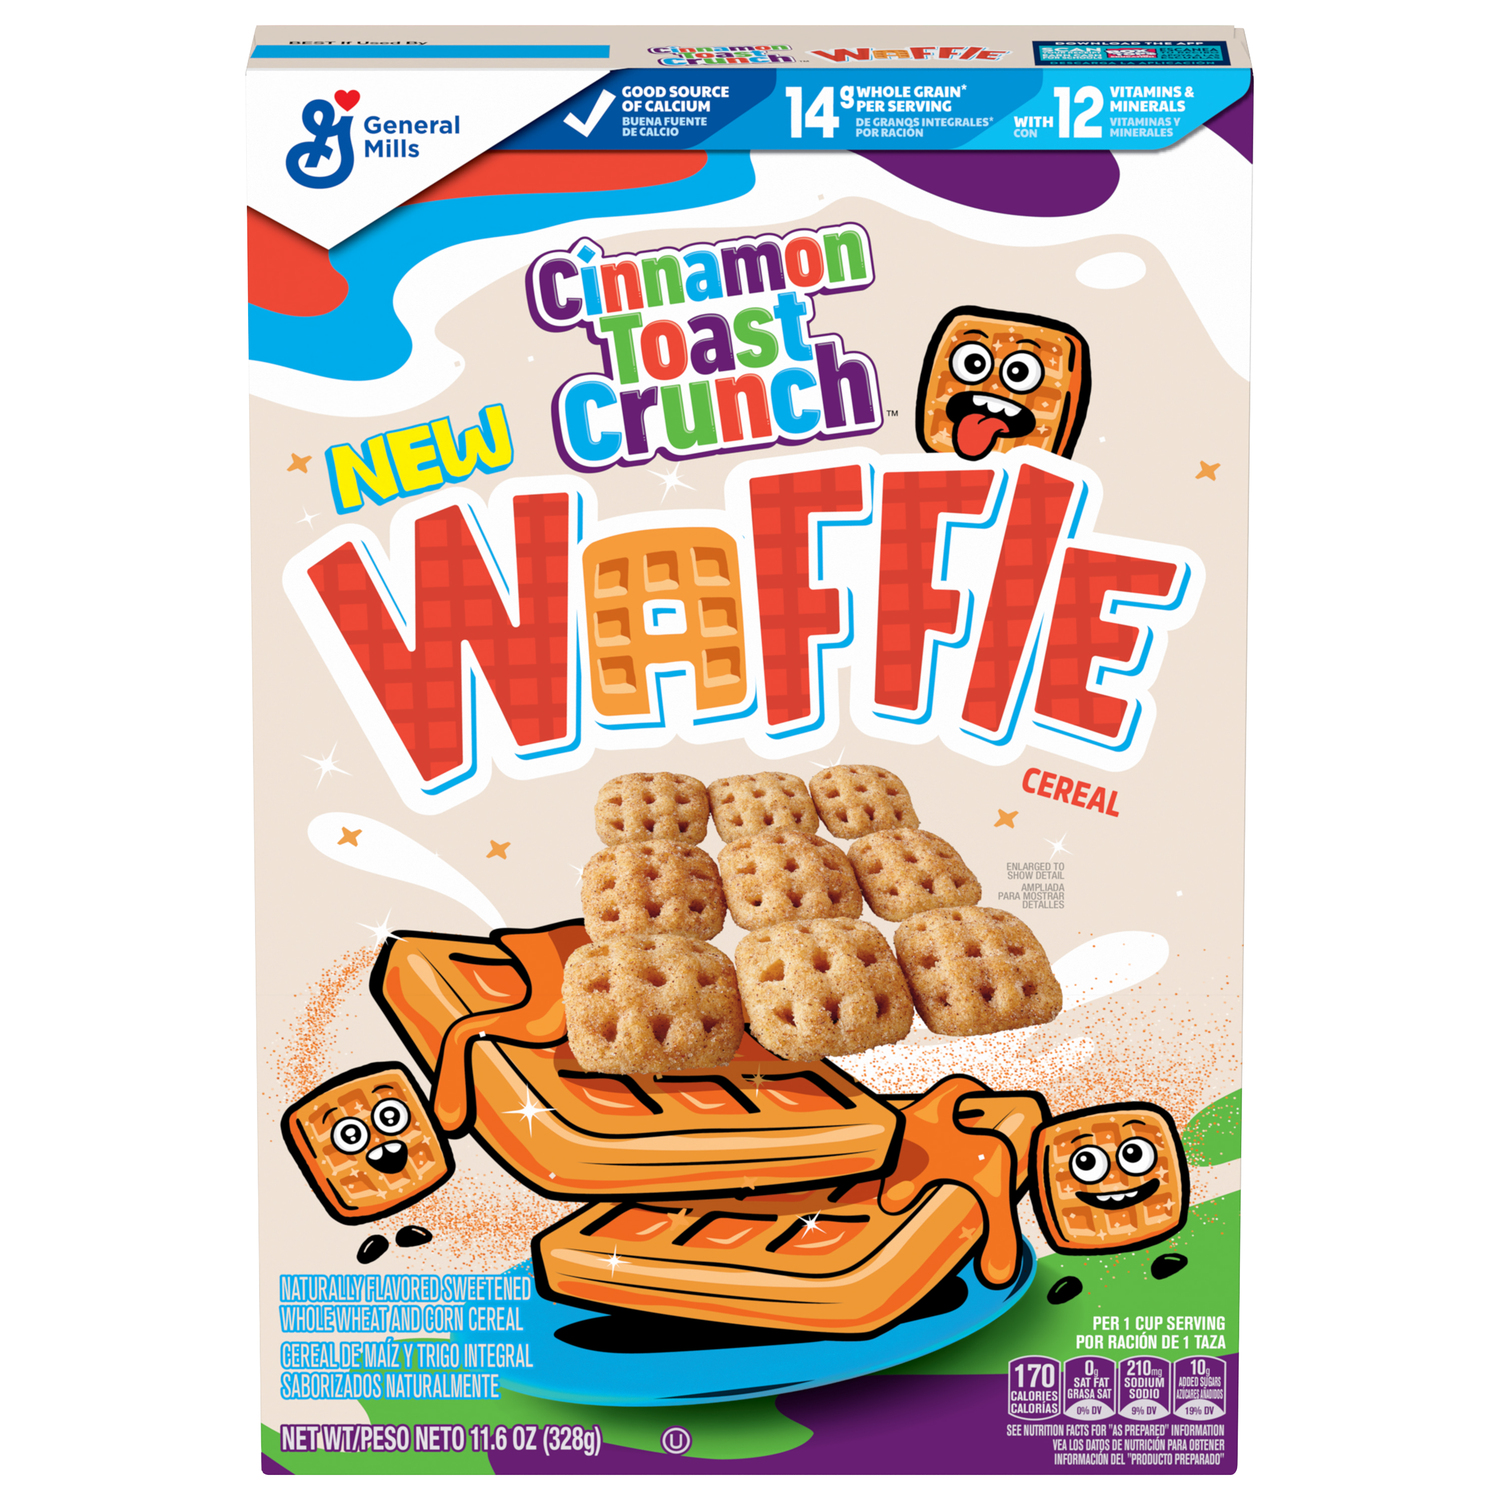 Cinnamon Toast Crunch Waffle 3 boxes for $4 after sale and $5 coupon $4